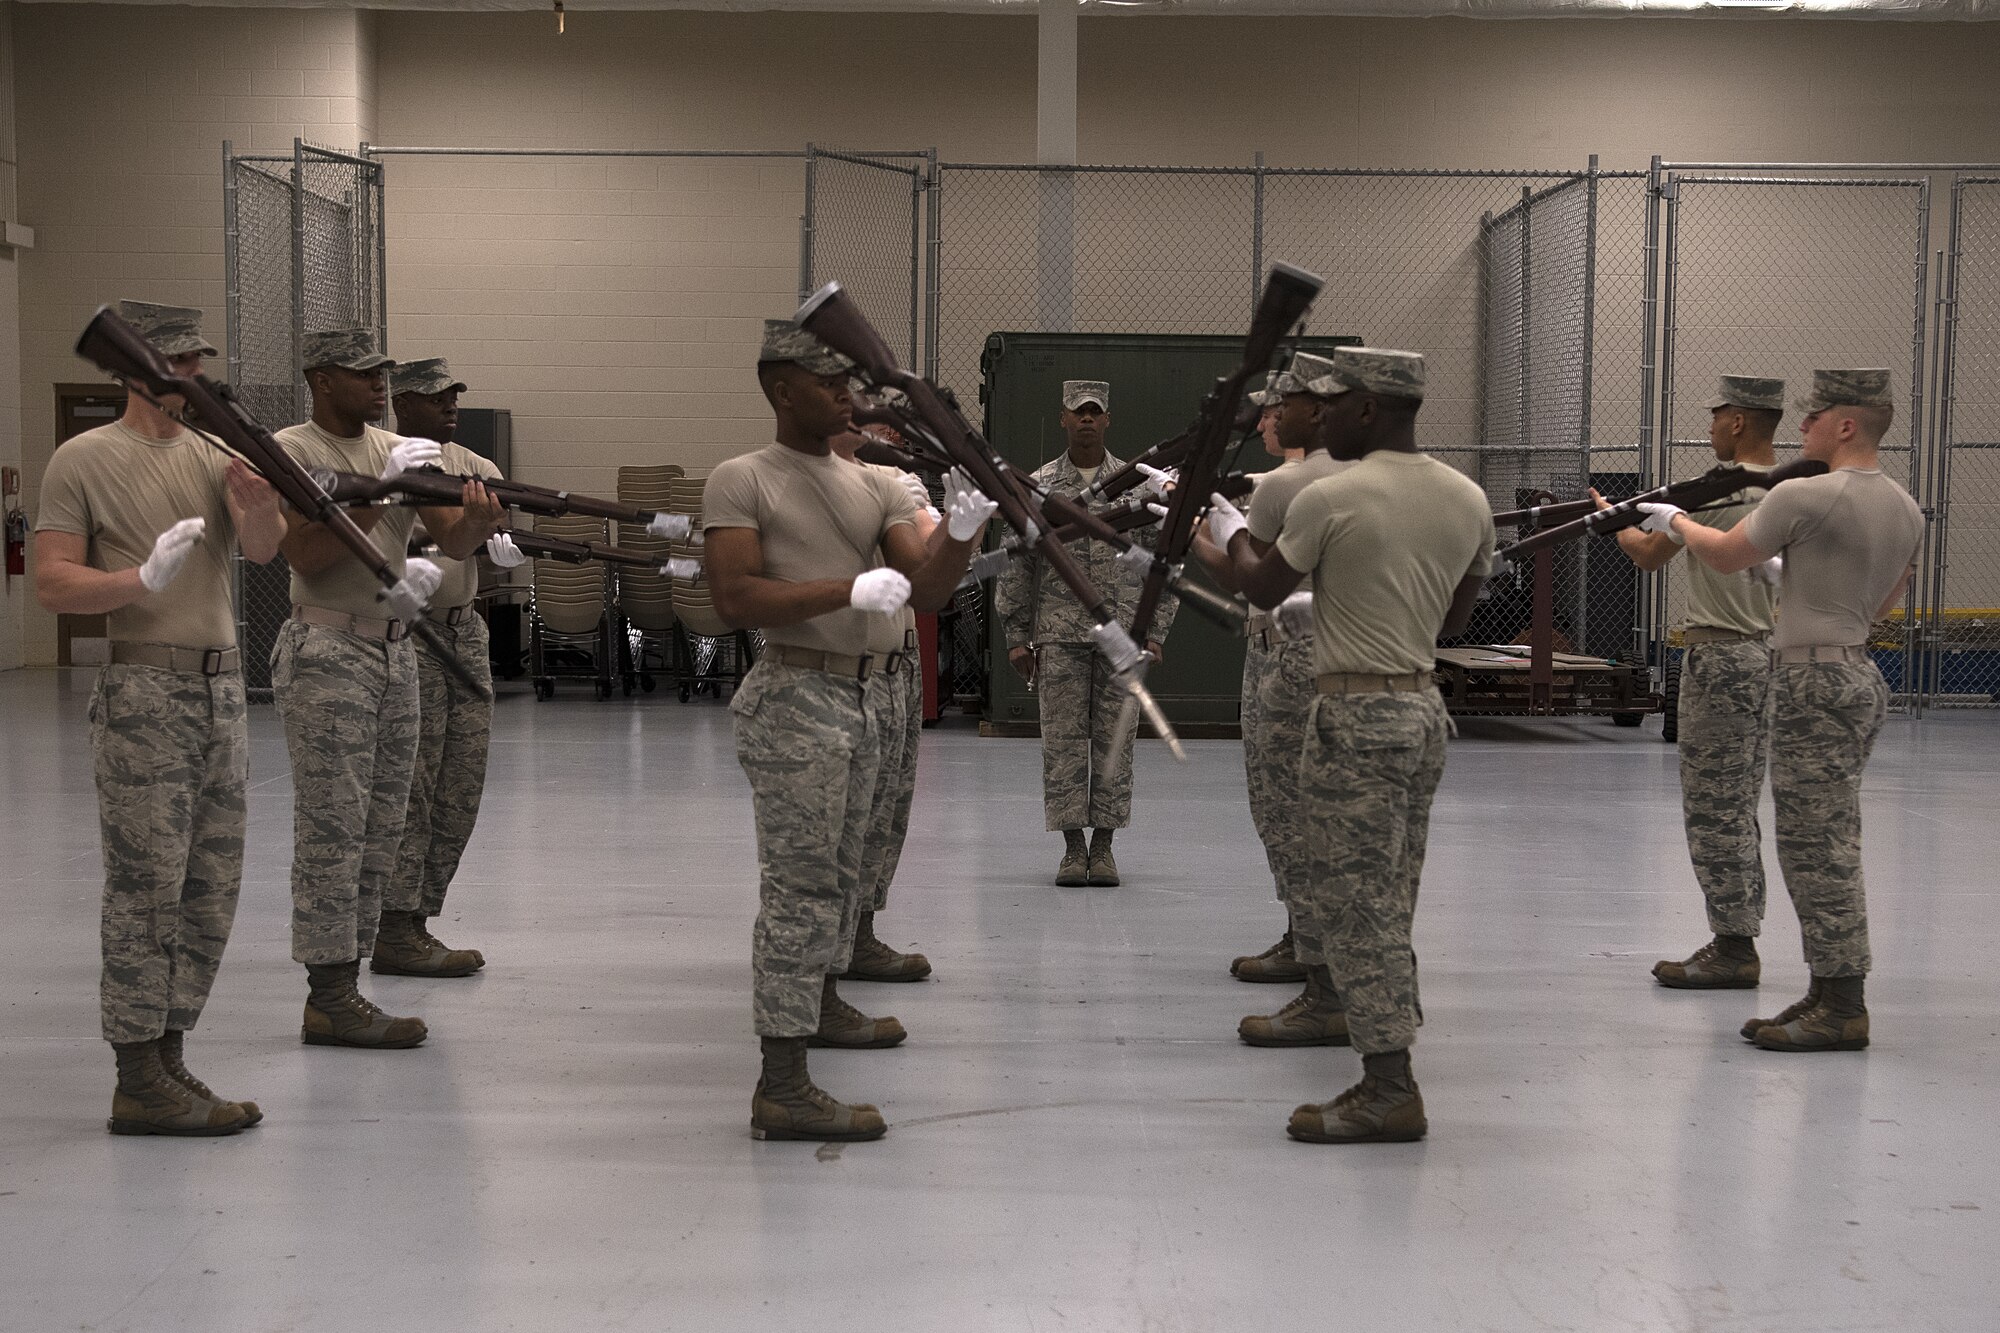 U.S. Air Force Honor Guard members practice their new routine inside the Roberts Consolidaated Aircraft Maintenance Facility at Keesler Air Force Base, Mississippi, Jan. 30, 2019. The Air Force Honor Guard spends five weeks at Keesler perfecting their routine they are going to use for the rest of the year. (U.S. Air Force photo by Airman 1st Class Suzie Plotnikov)